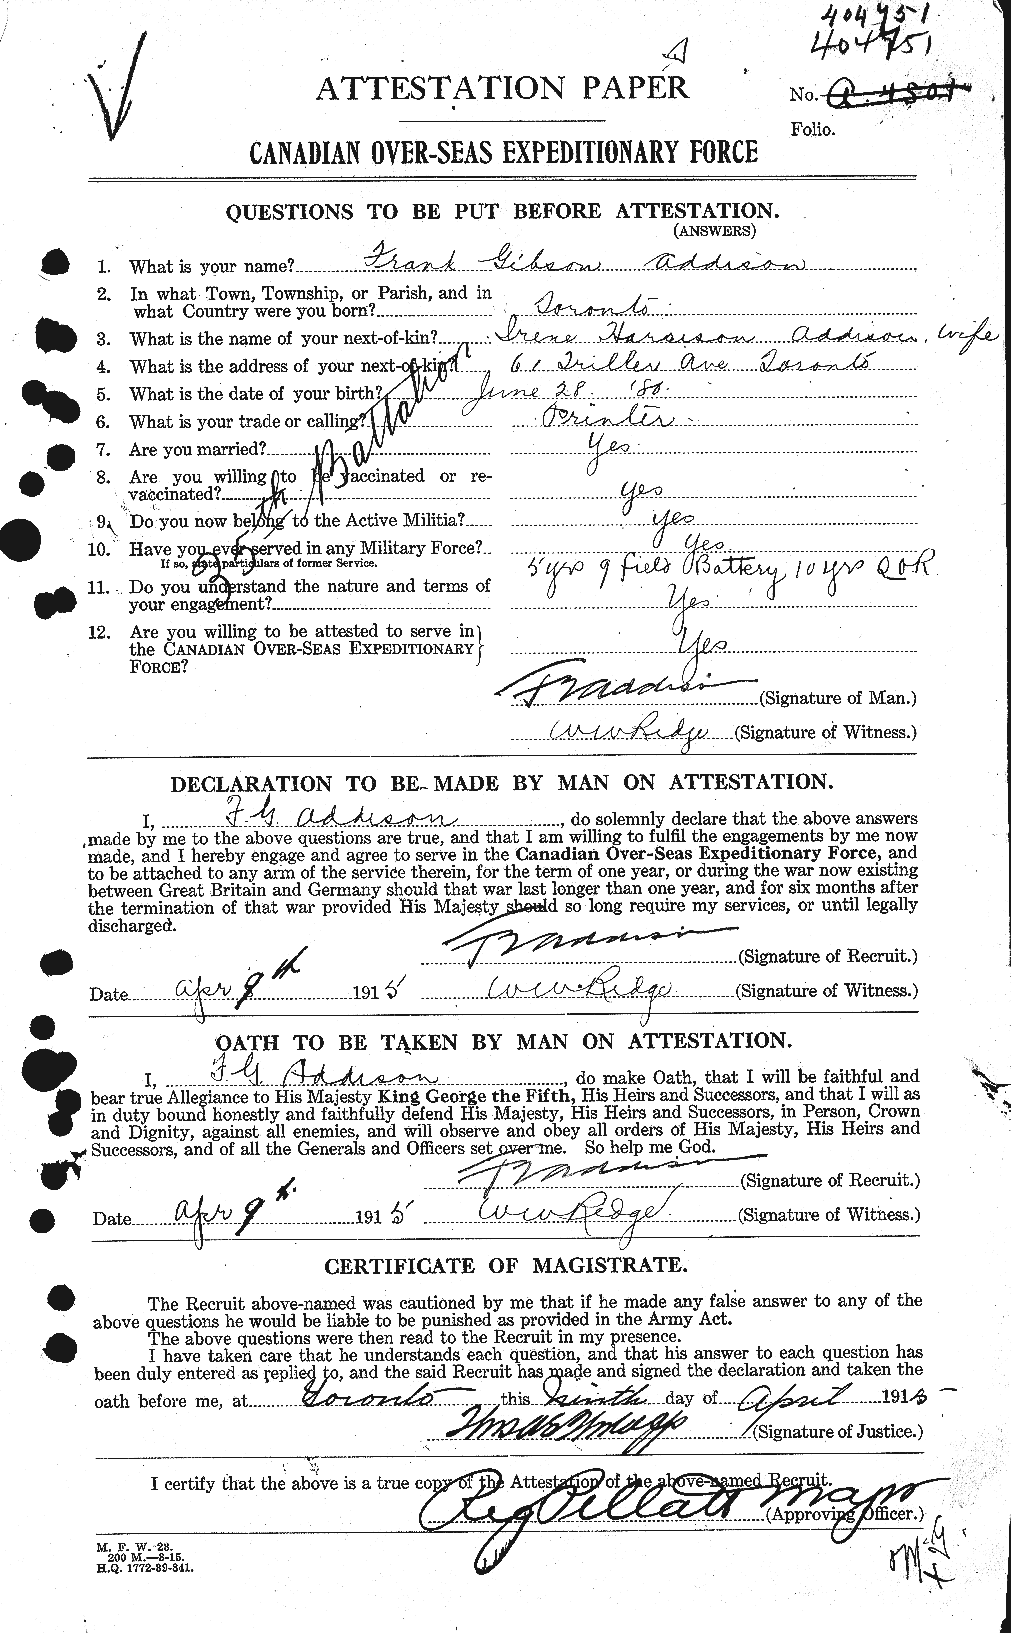 Personnel Records of the First World War - CEF 202488a